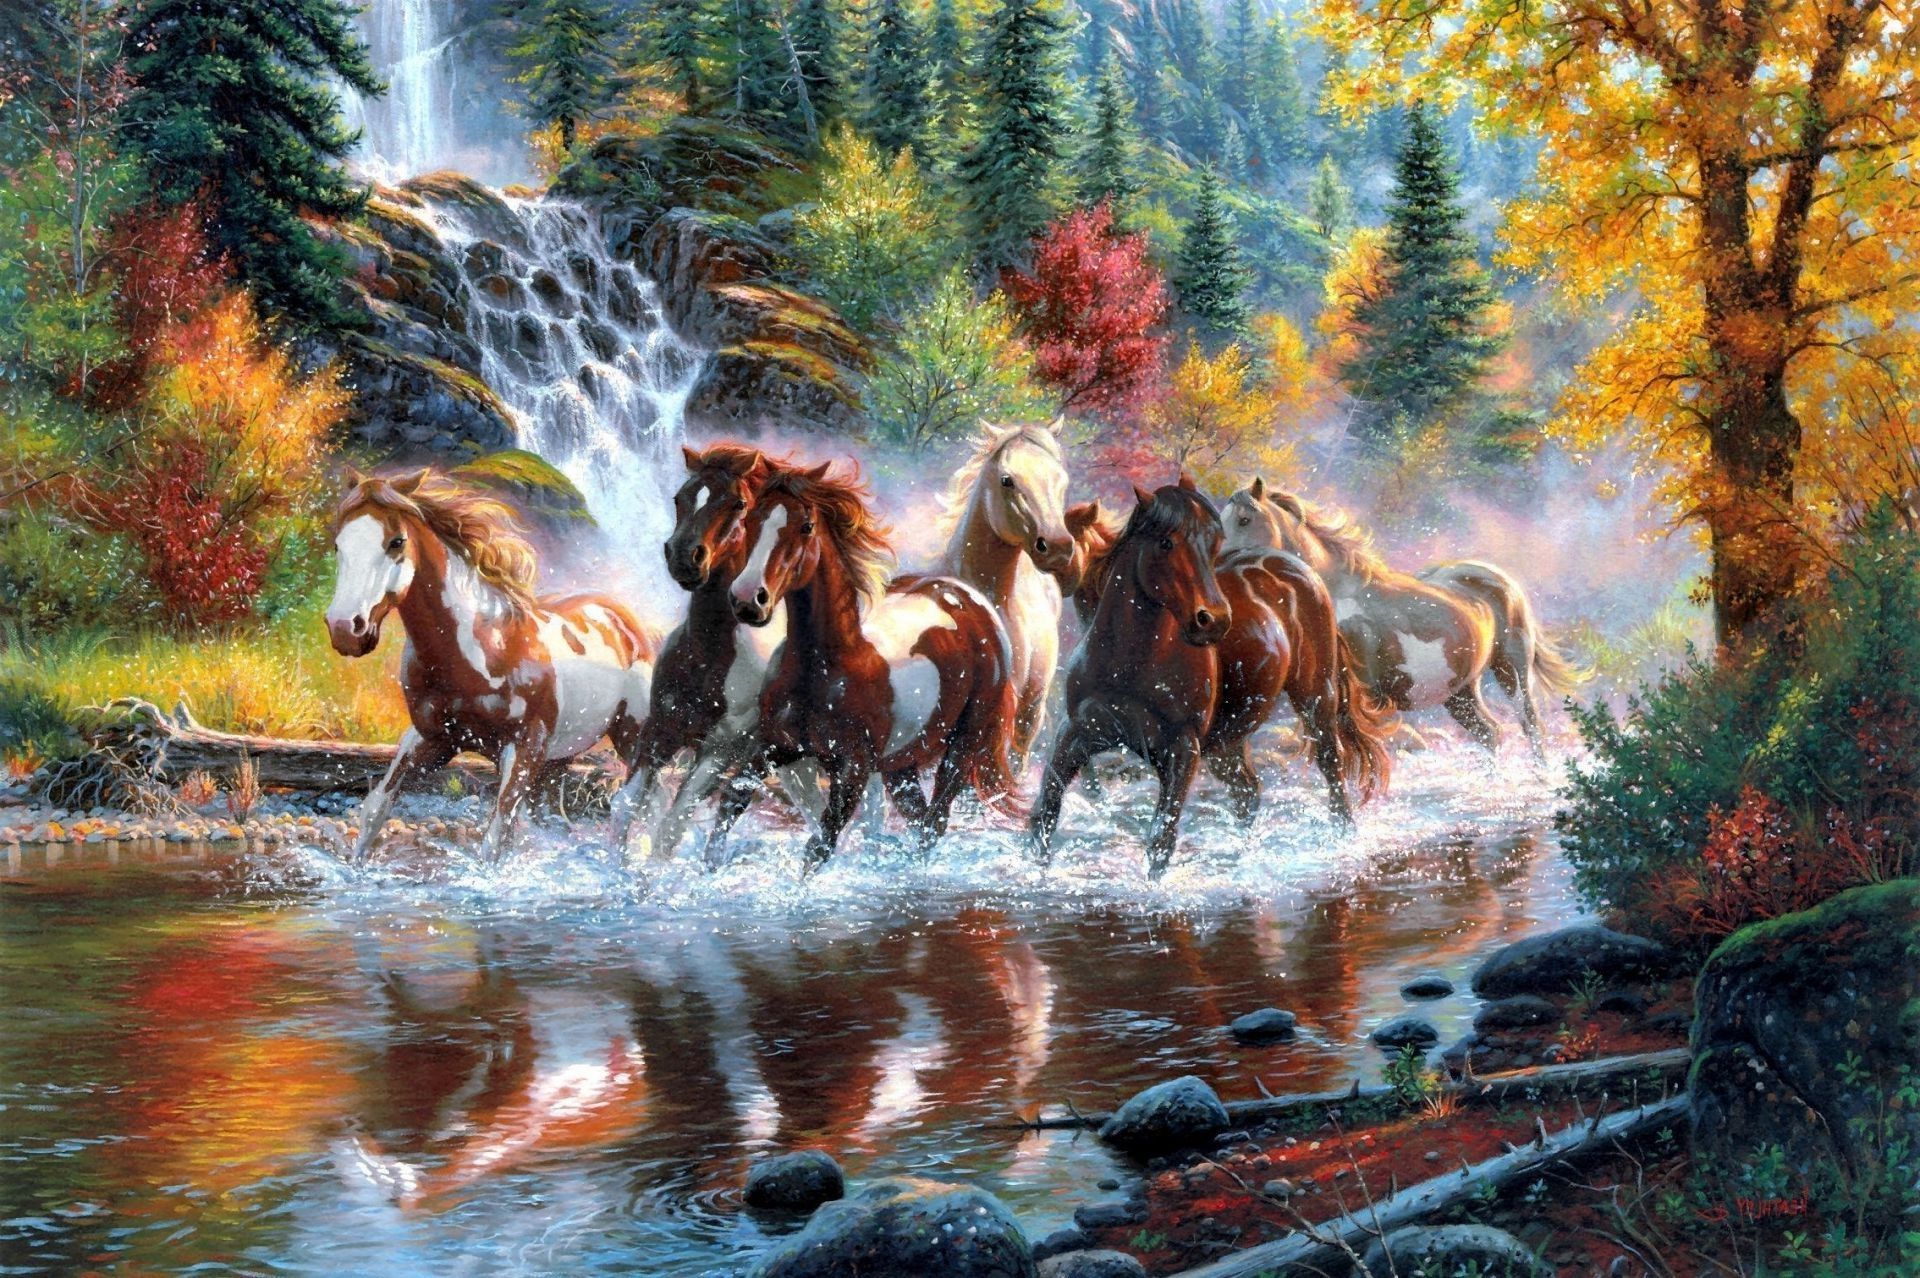 Horses The Horses Waterfall Forest Autumn River By Horse